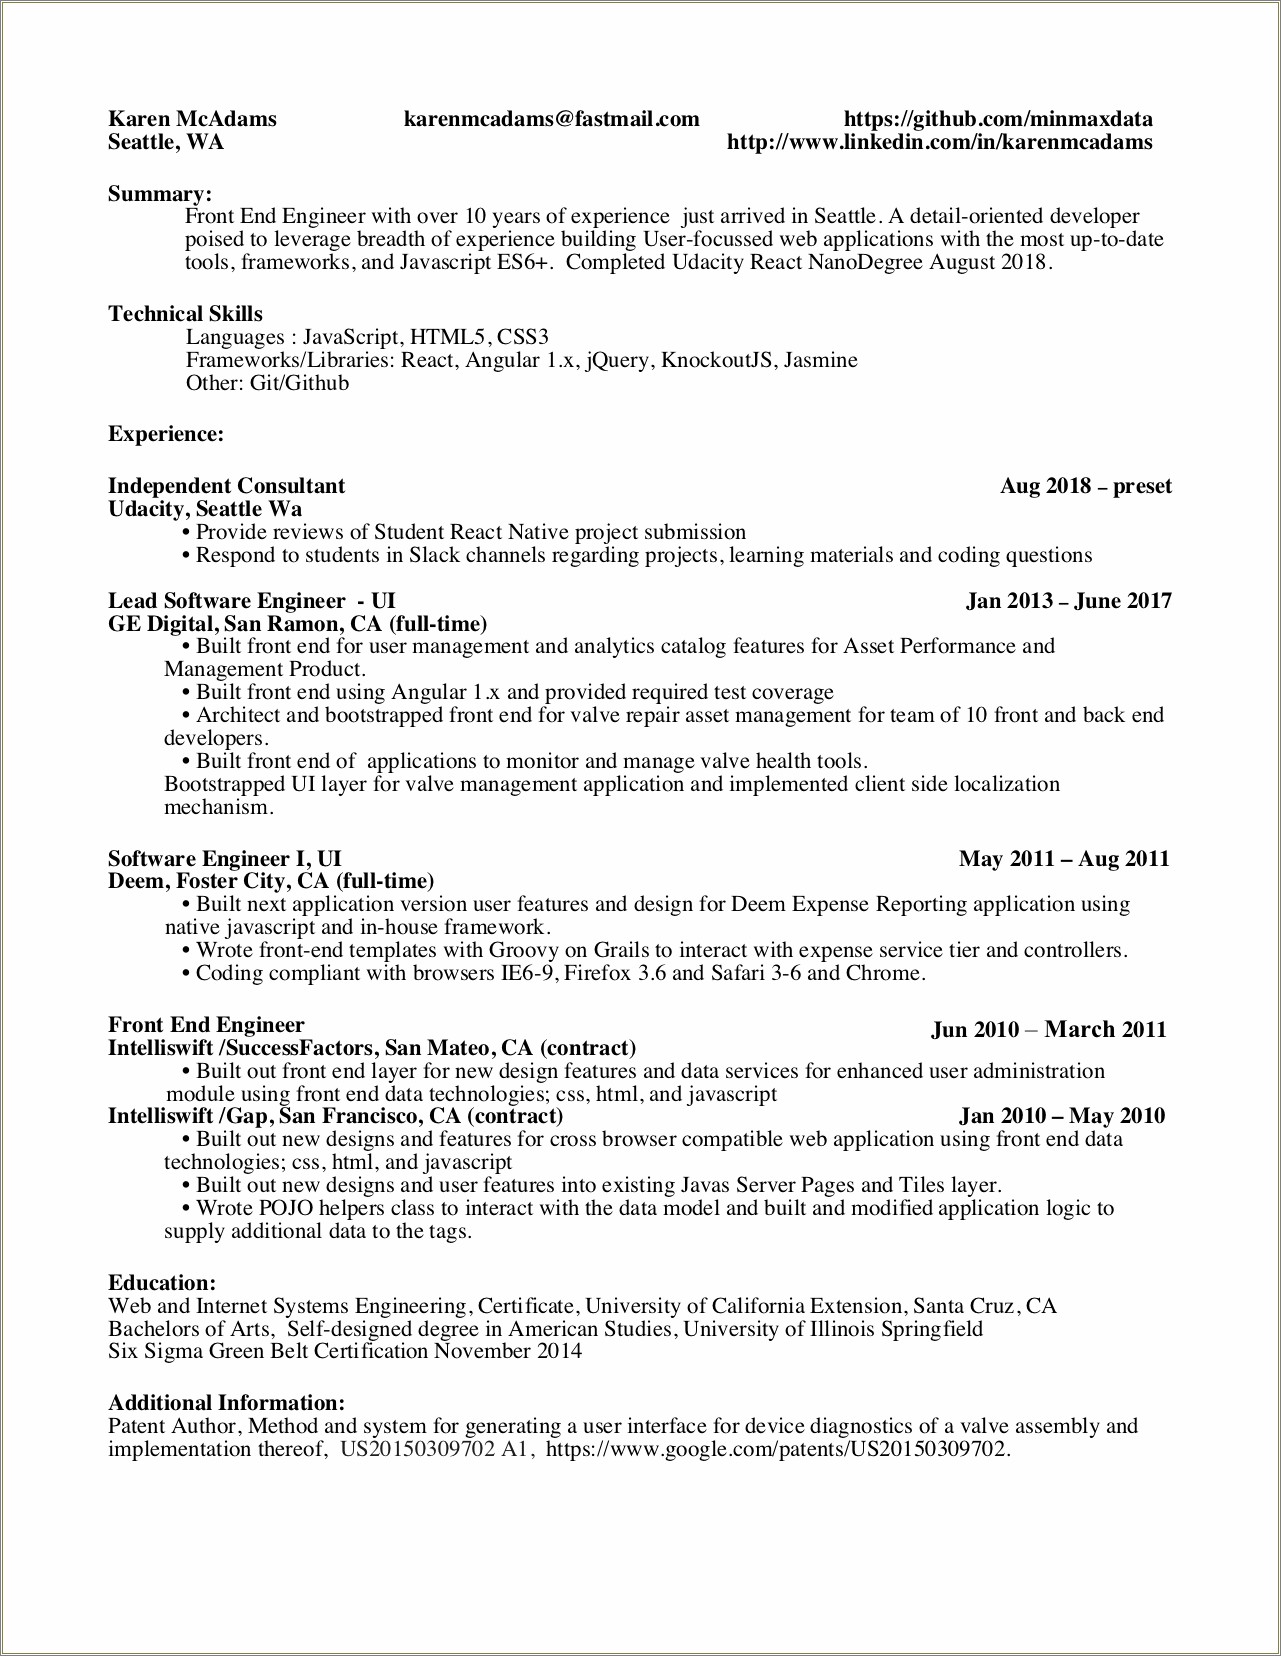 Where To Put Skills Section On Resume Reddit